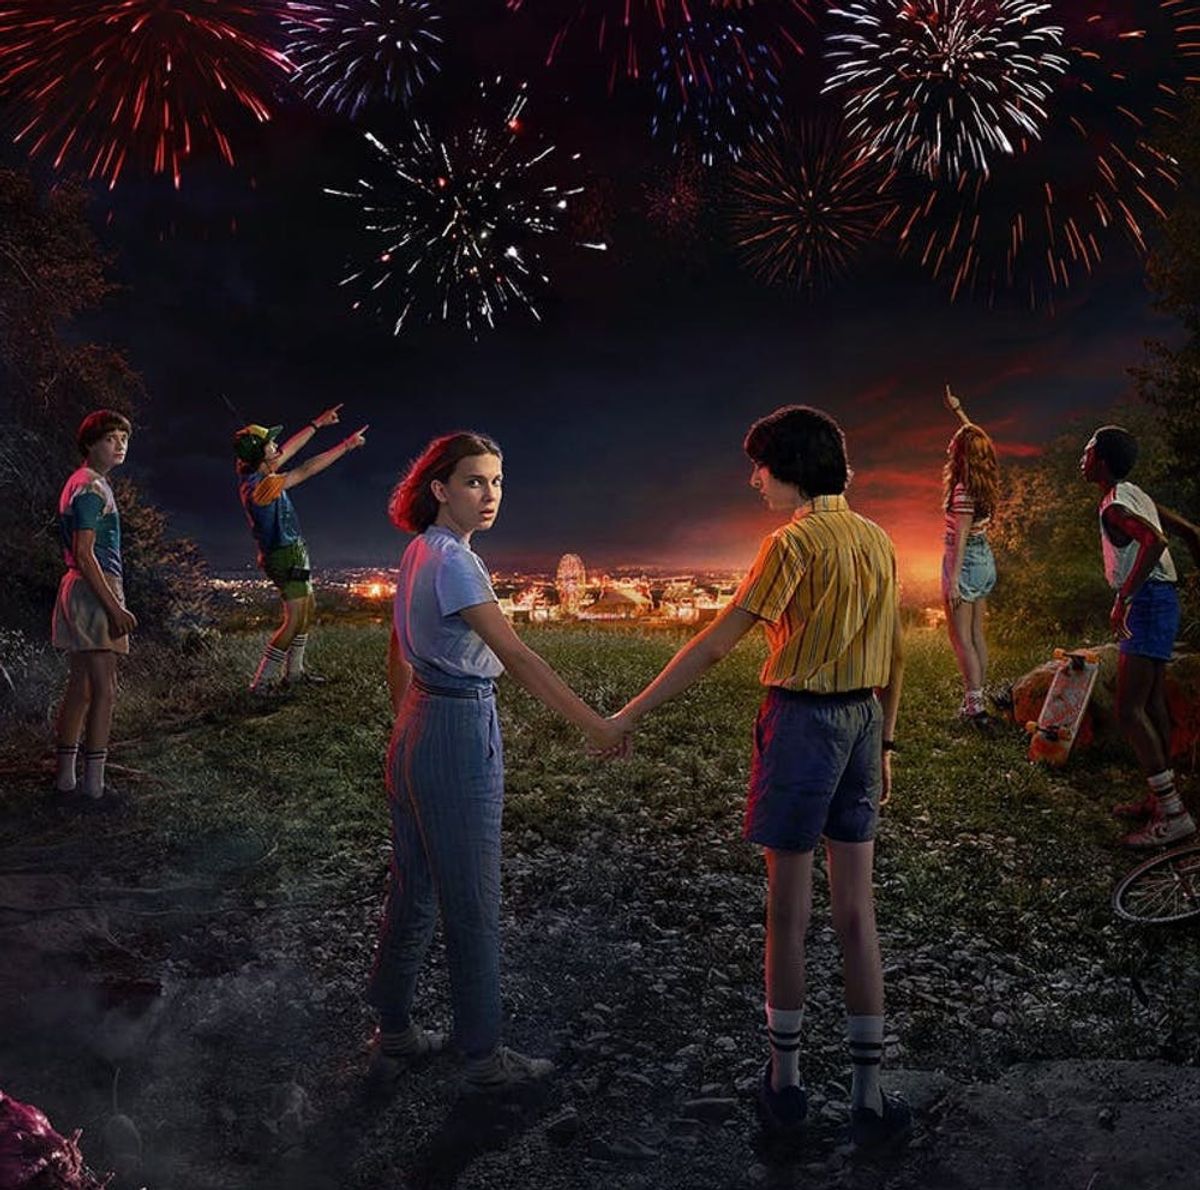 The ‘Stranger Things’ Kids Grow Up in the Spooky New Season 3 Trailer